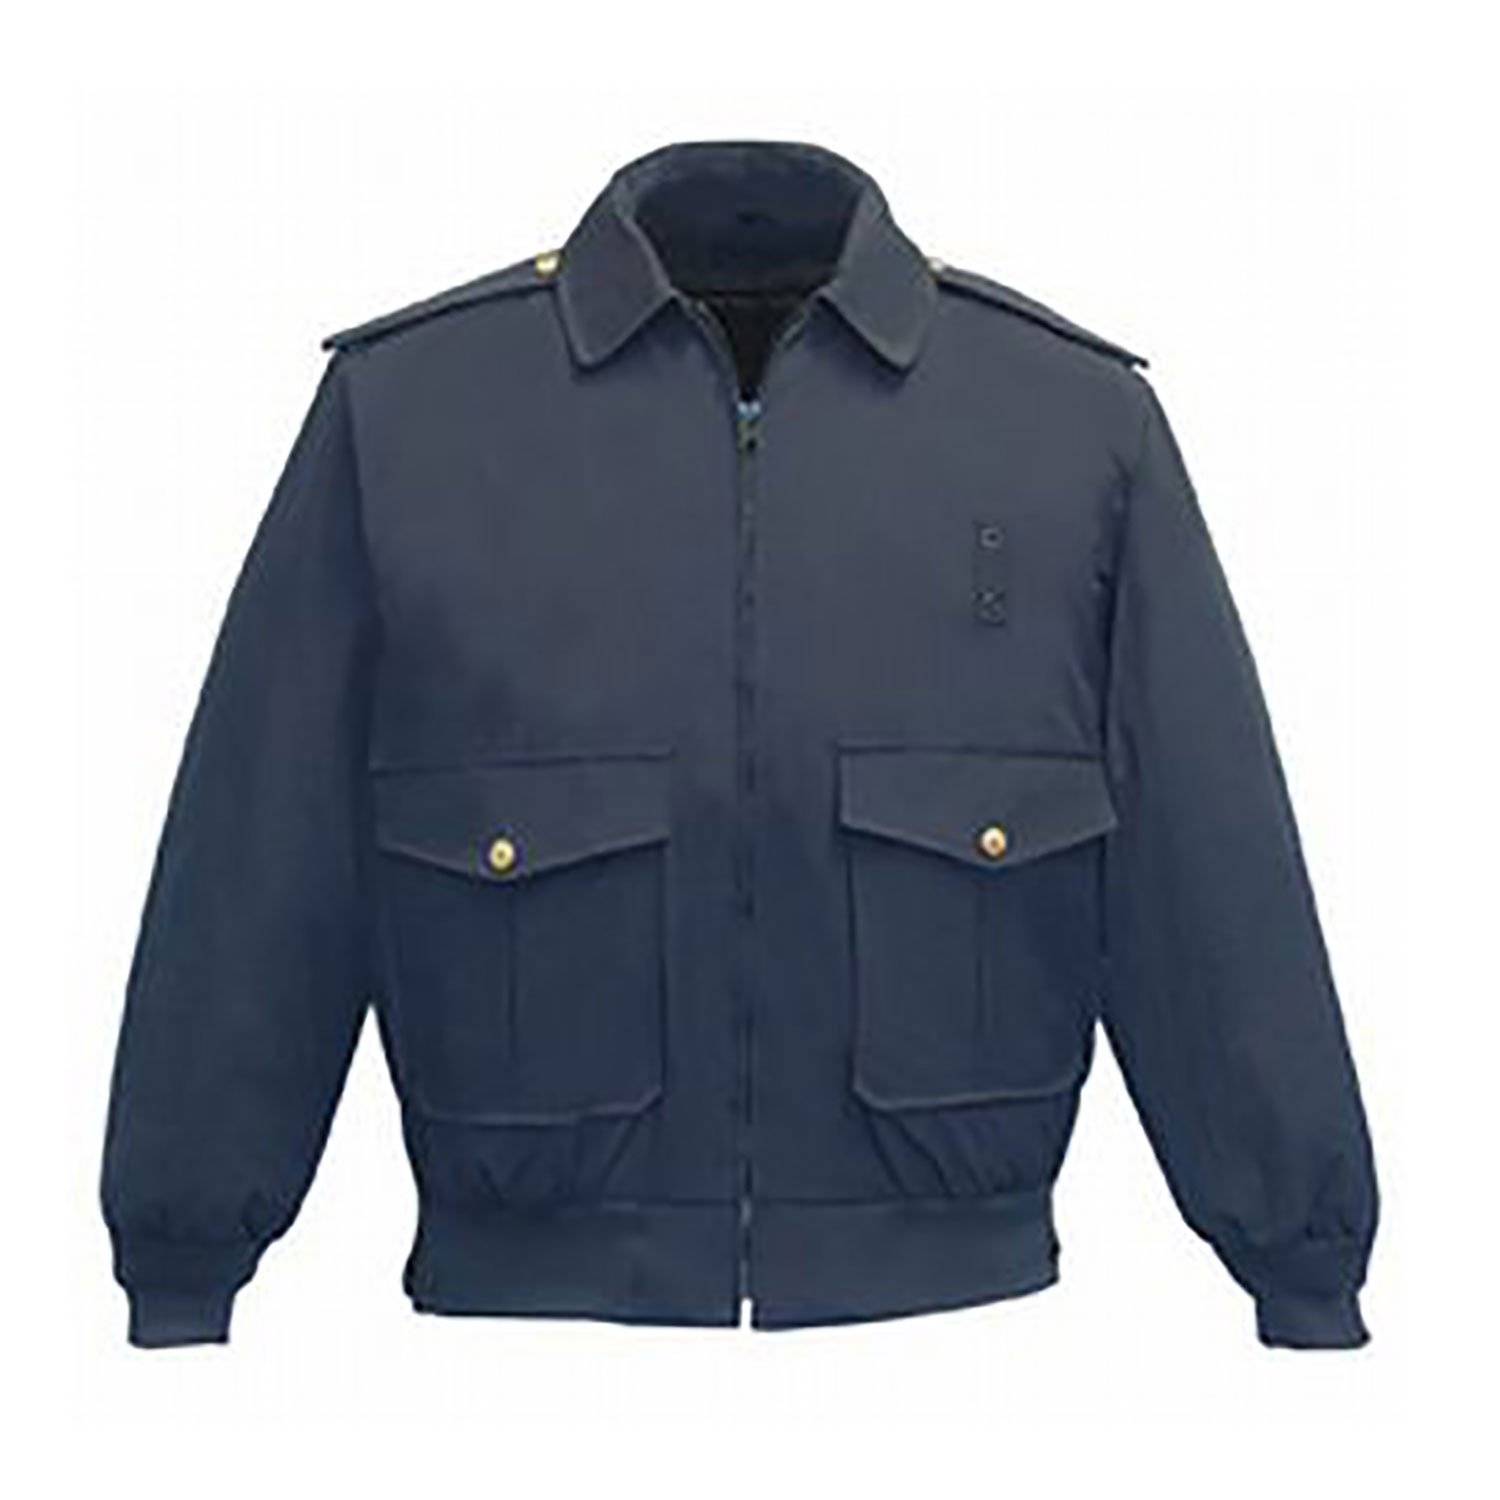 Flying Cross Ultra 2000 Jacket with Removable Liner at Galls